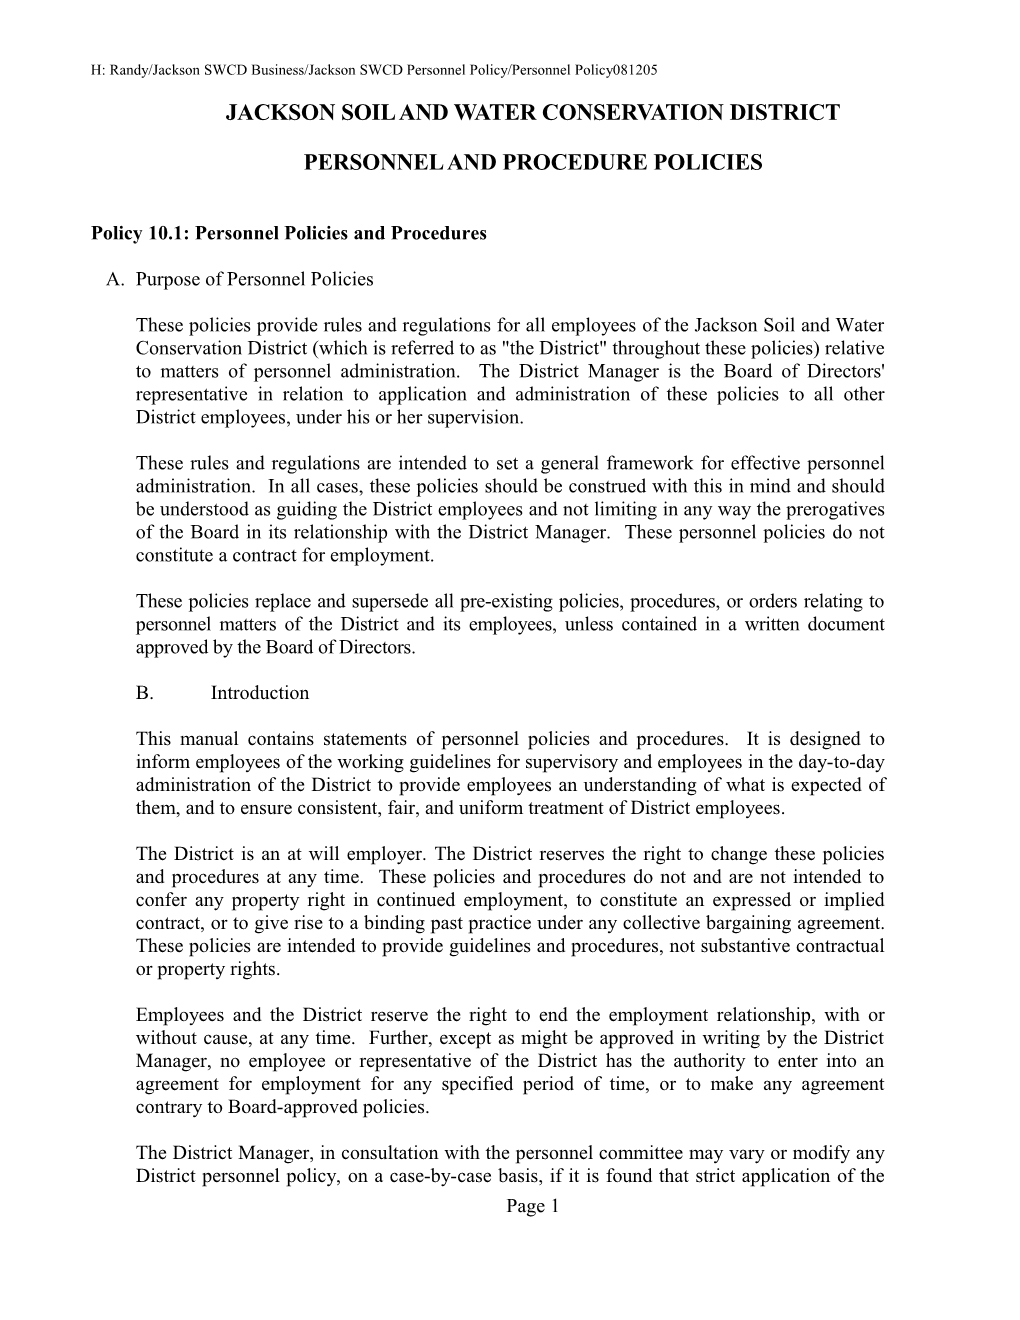 Personnel Policy of Jackson SWCD